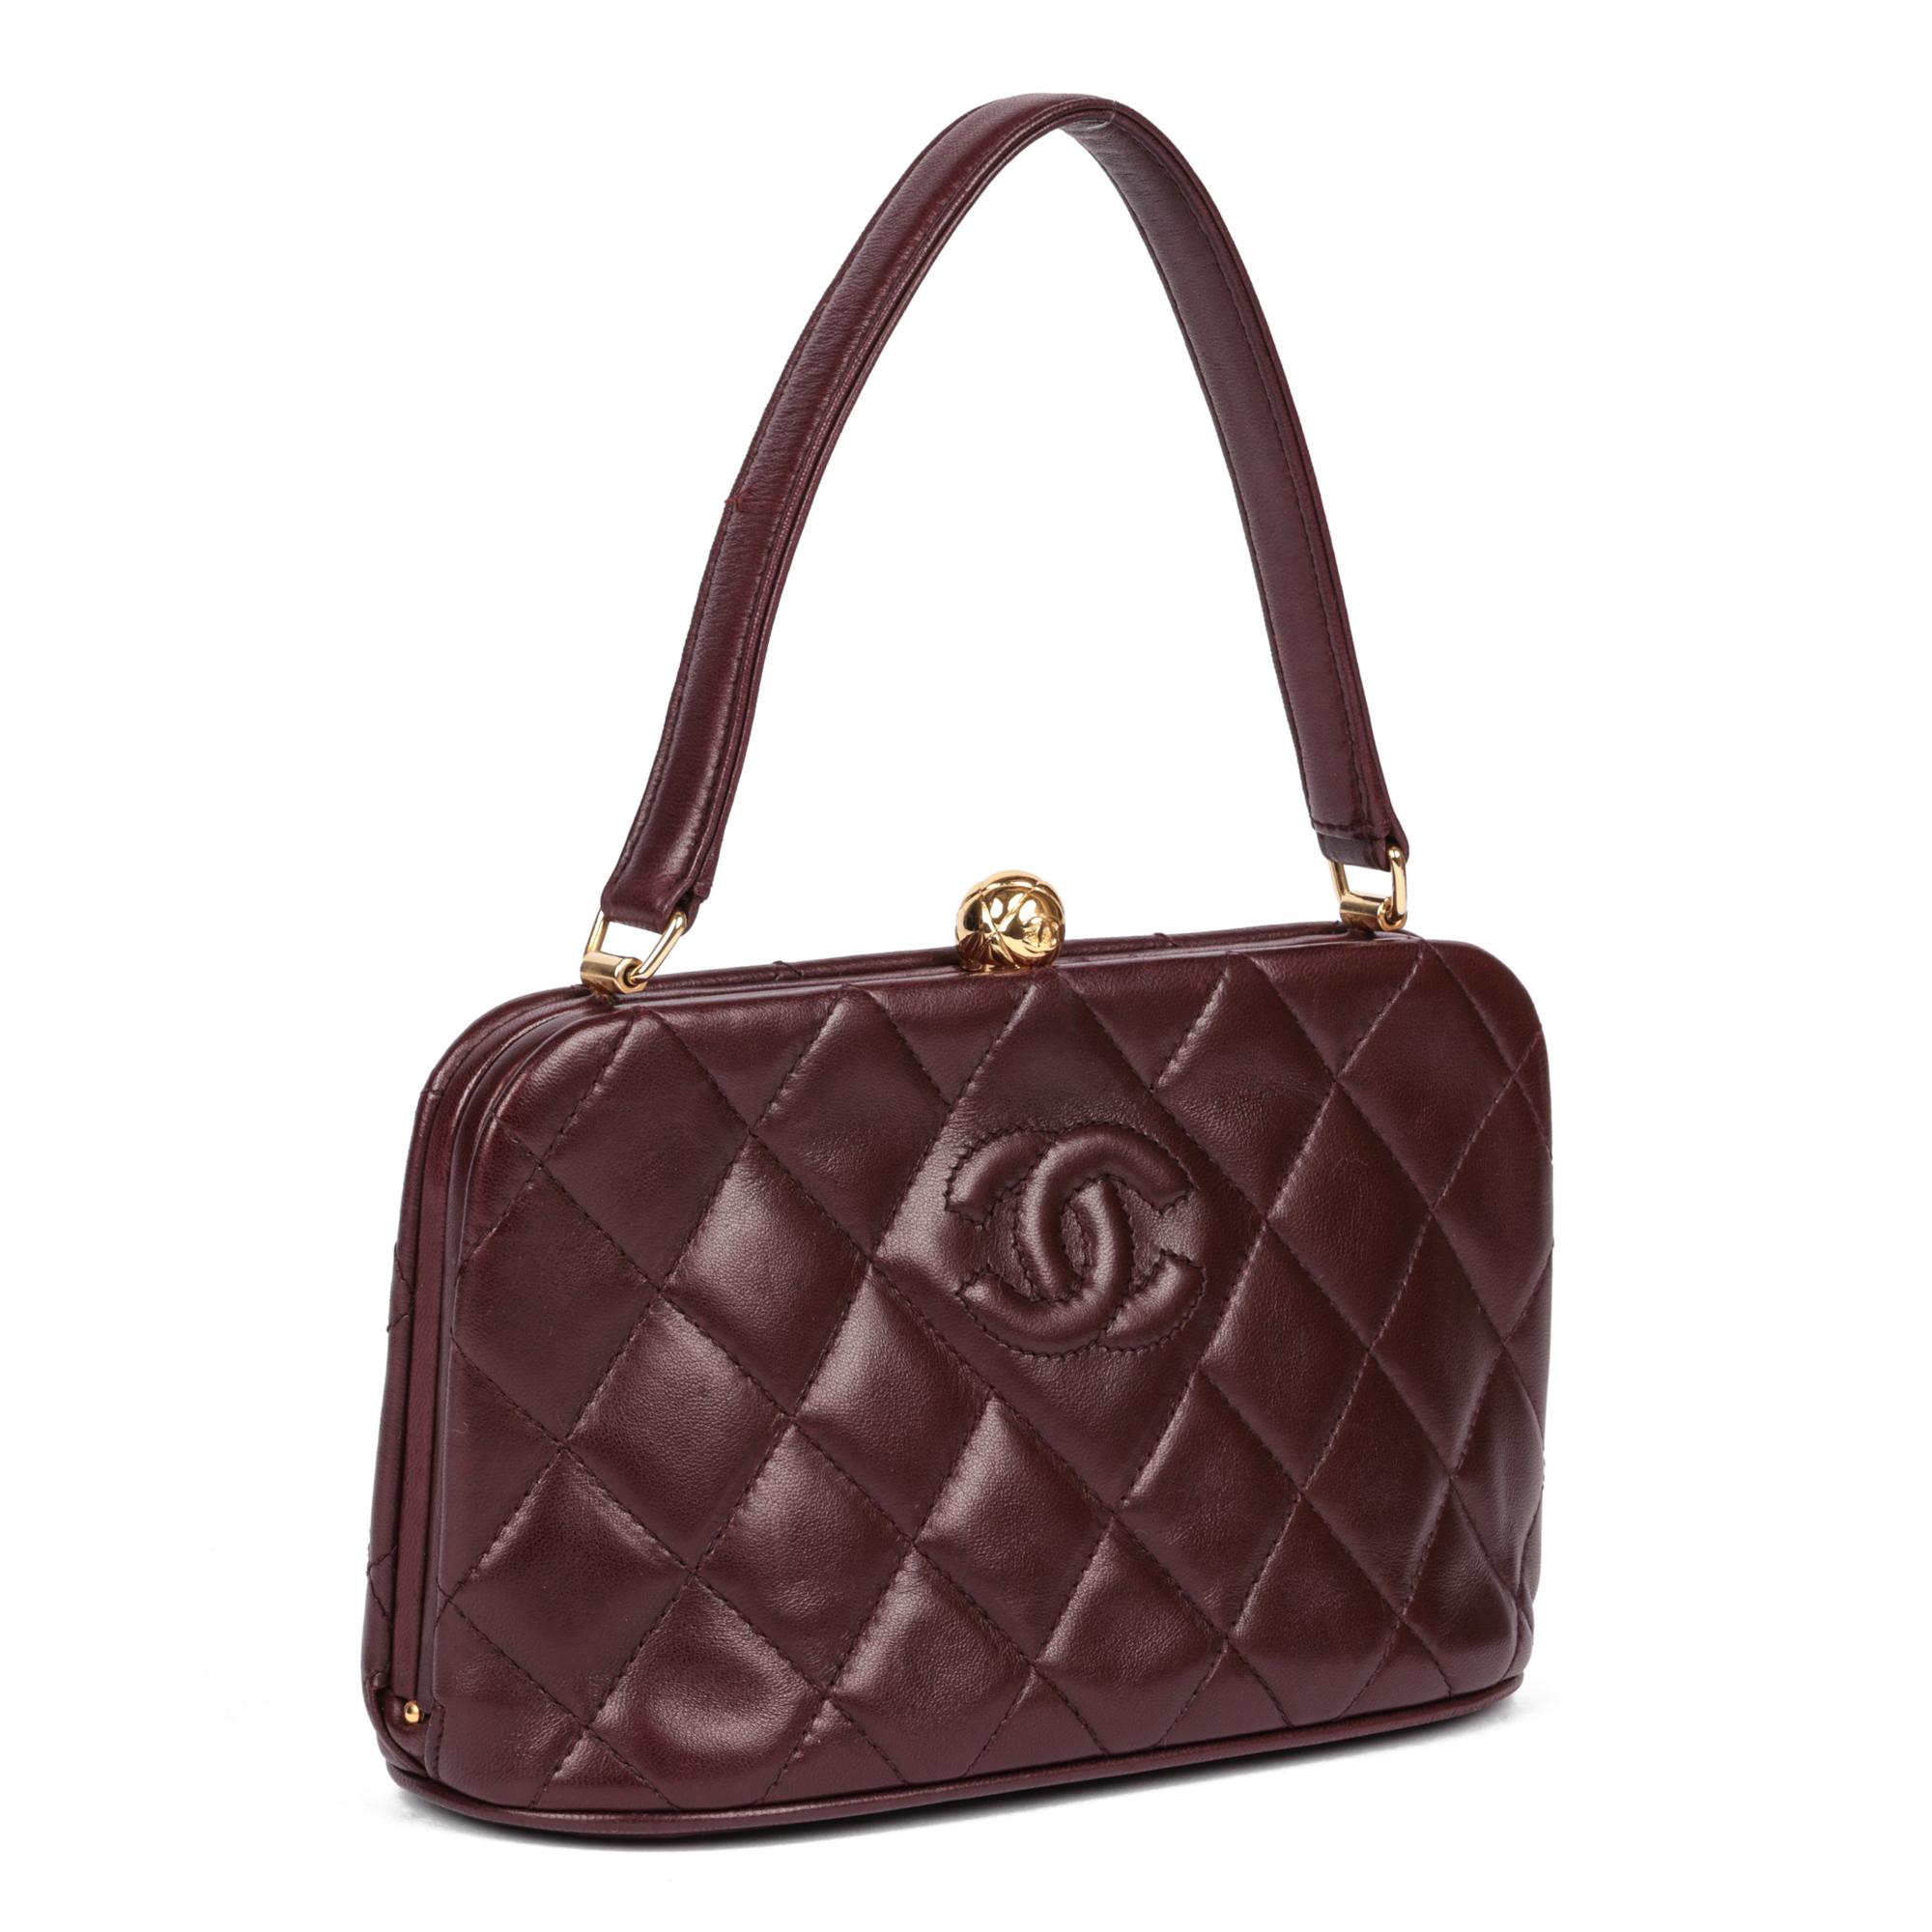 CHANEL
Burgundy Quilted Lambskin Timeless Top Handle Frame Bag

Serial Number: 3481690
Age (Circa): 1995
Accompanied By: Chanel Dust Bag
Authenticity Details: Serial Sticker (Made in Italy)
Gender: Ladies
Type: Top Handle 

Colour: